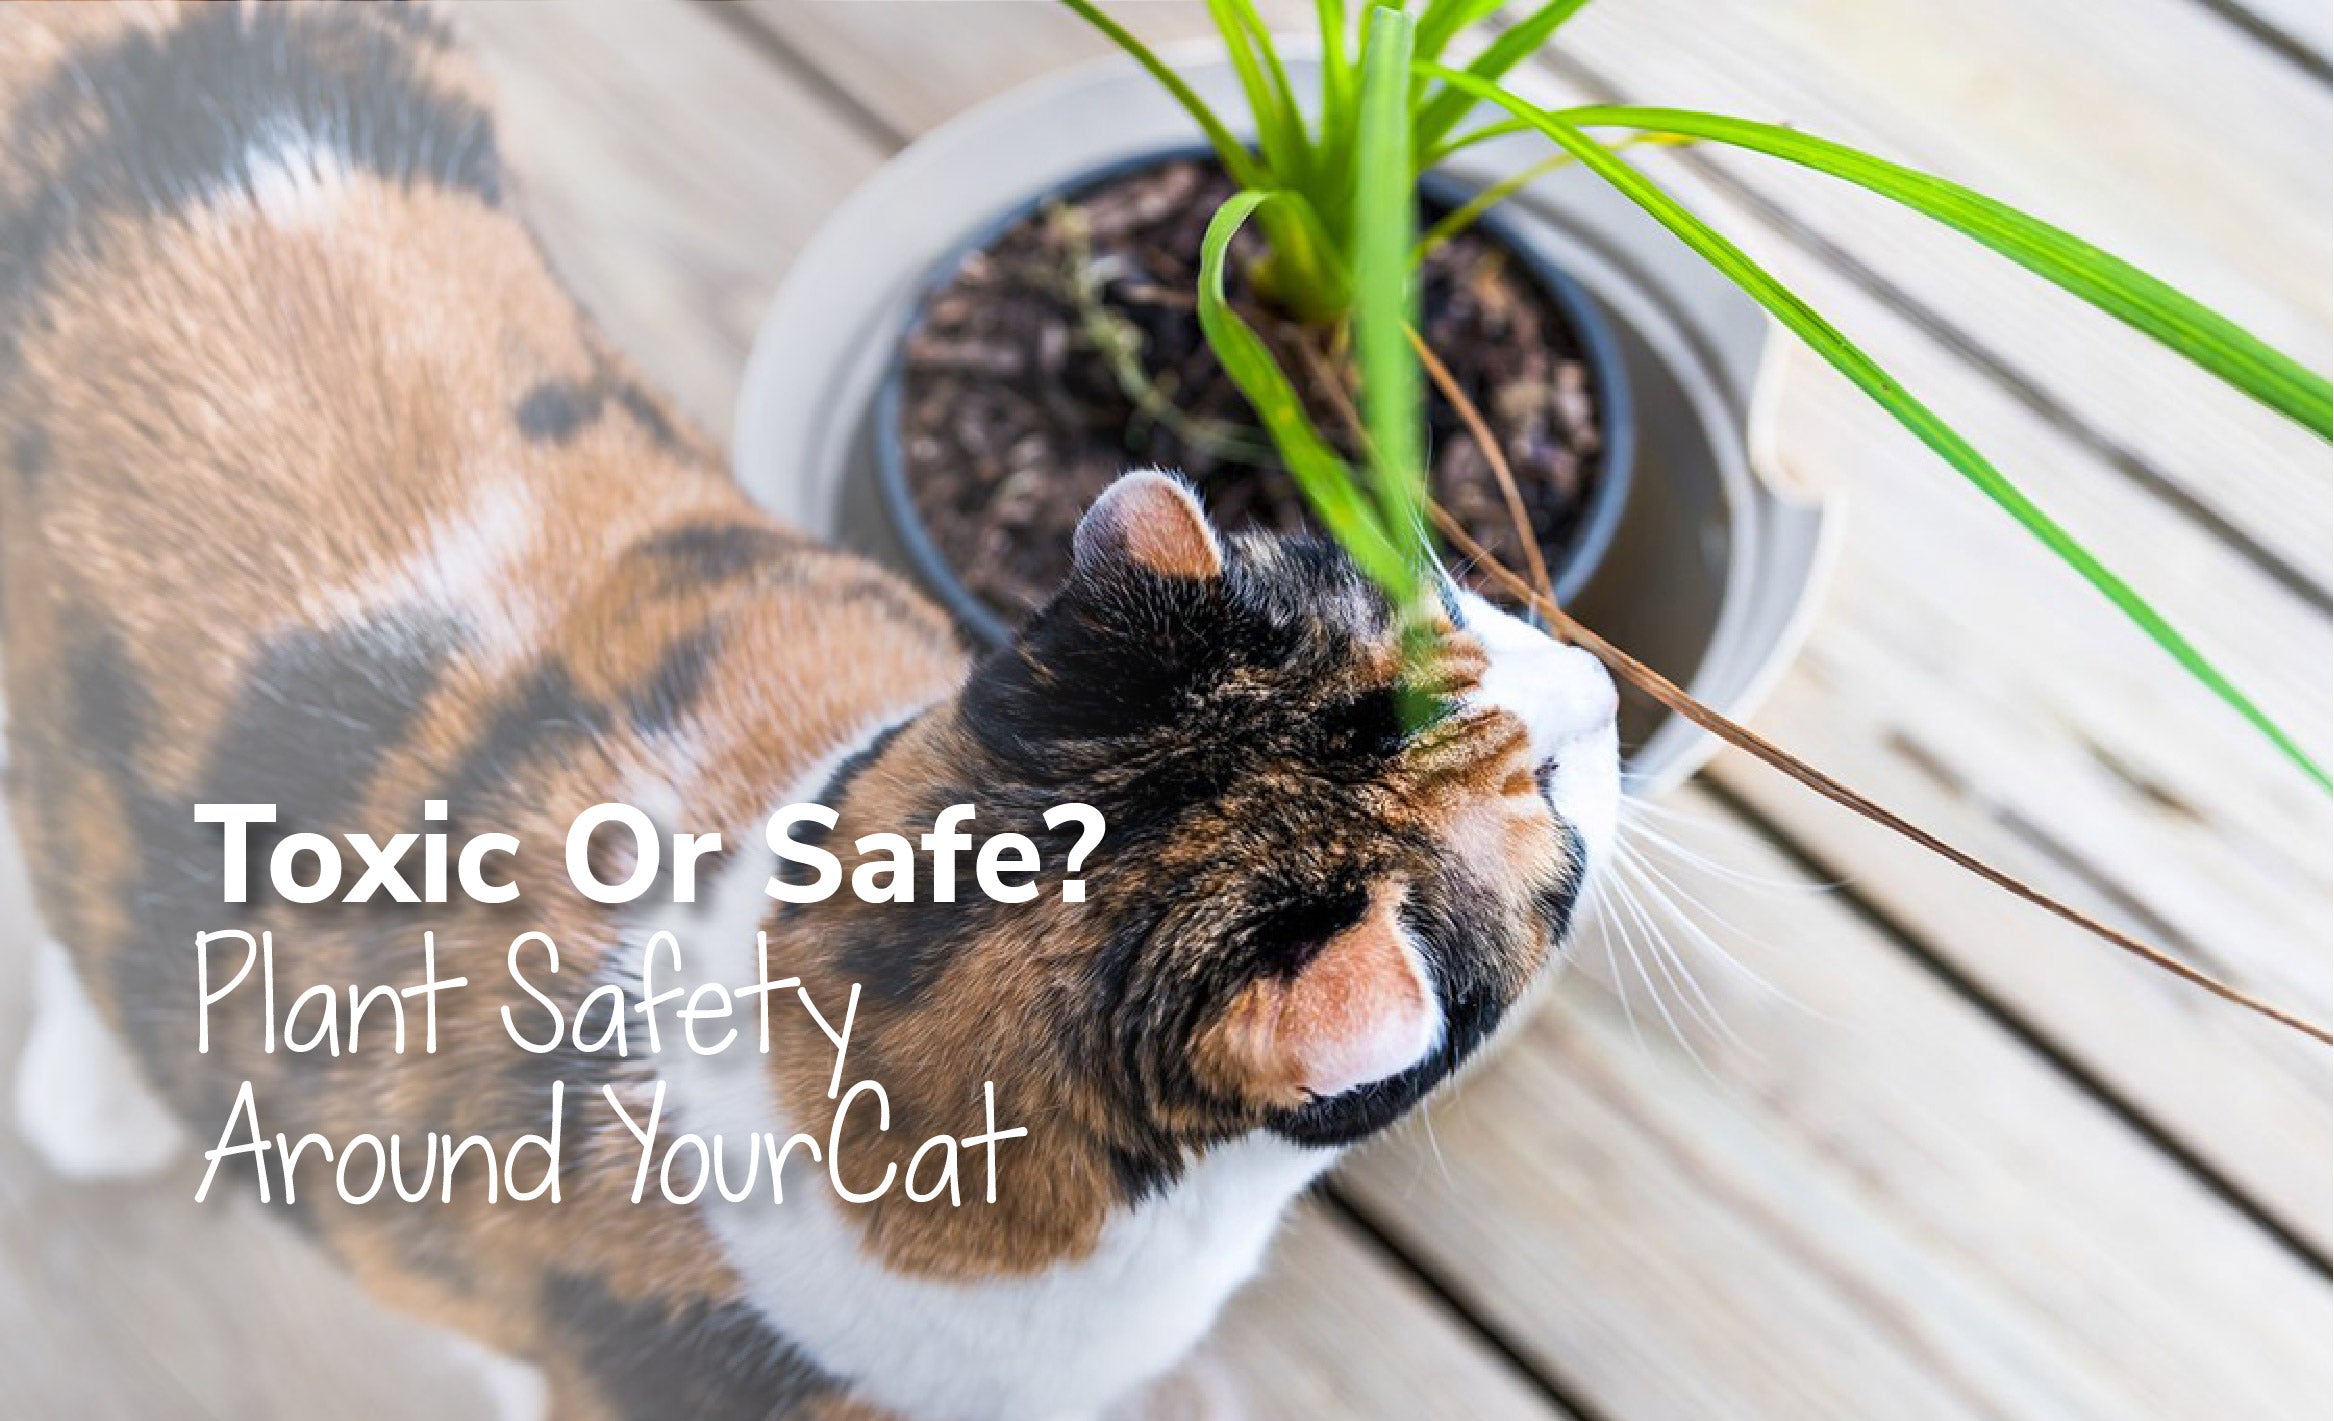 Toxic Or Safe? Plant Safety Around Your Cat